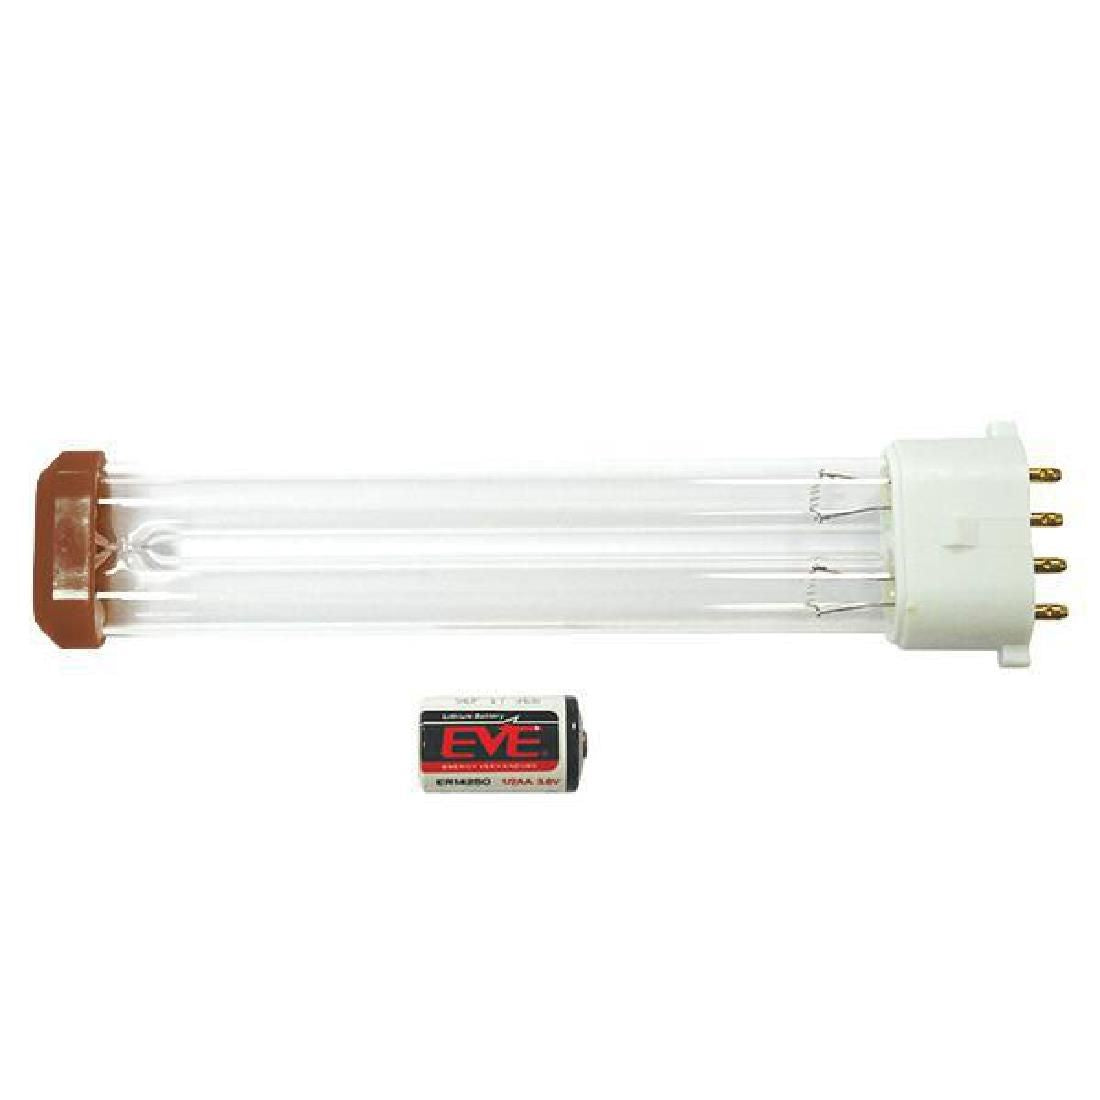 FP024 HyGenikx System Shatterproof Replacement Lamp and Battery Brown Cap HGX-05-O JD Catering Equipment Solutions Ltd